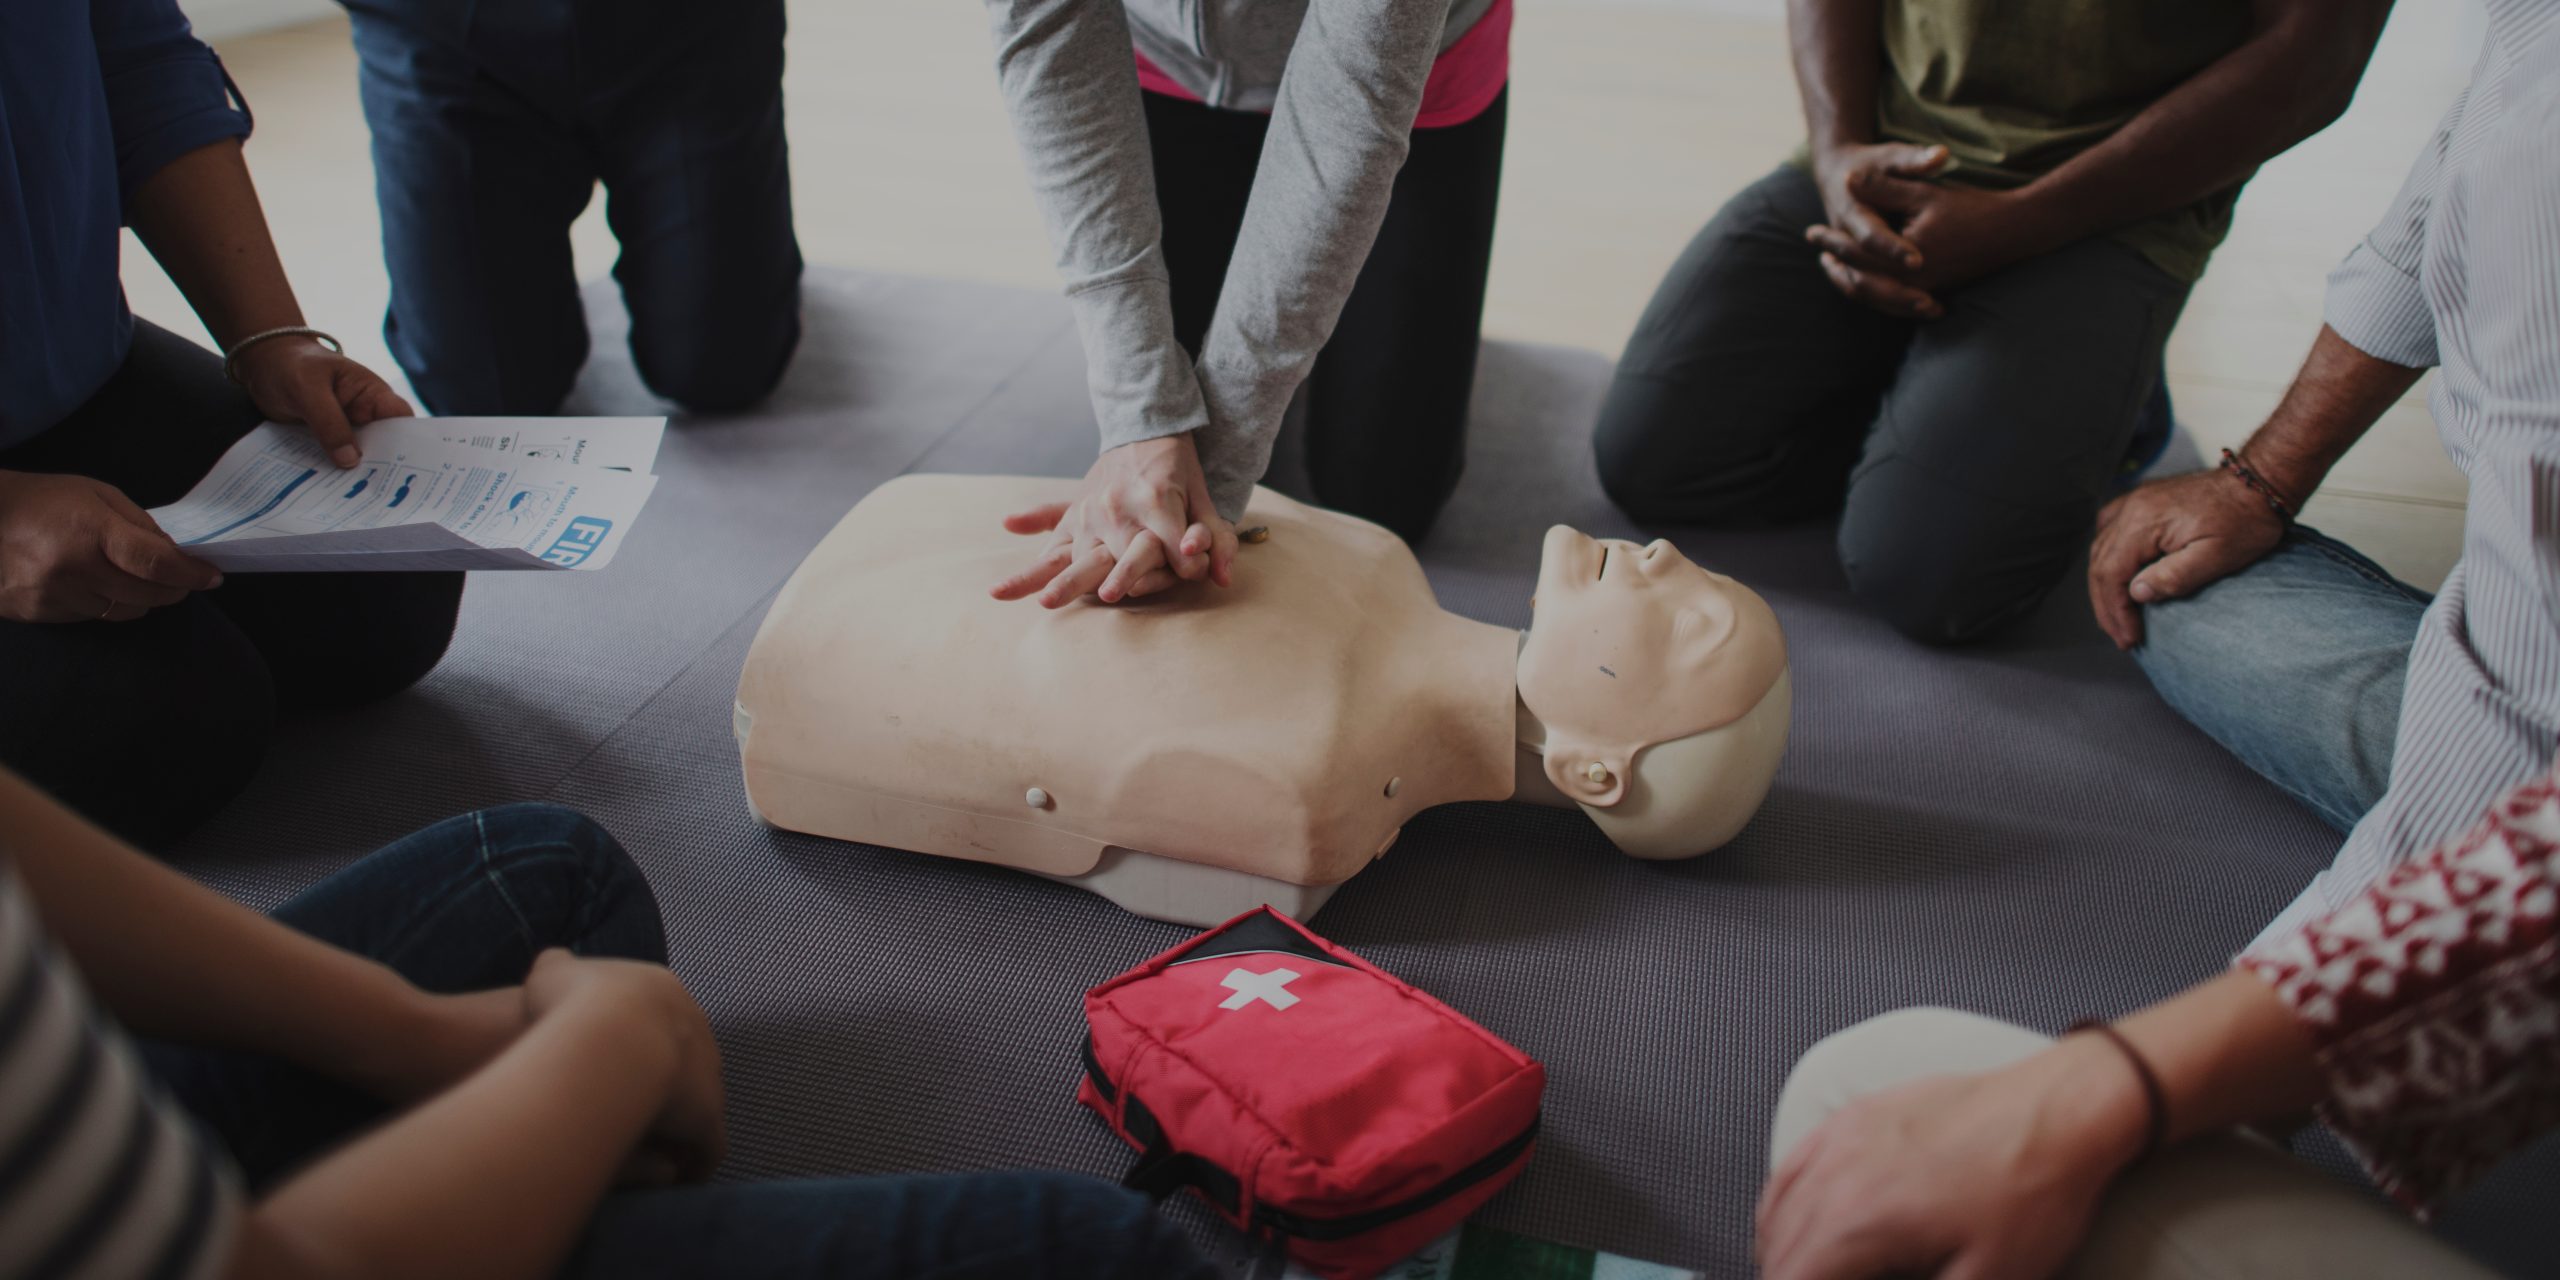 Group of people practising CPR on a training mannequin with a first aid kit nearby.